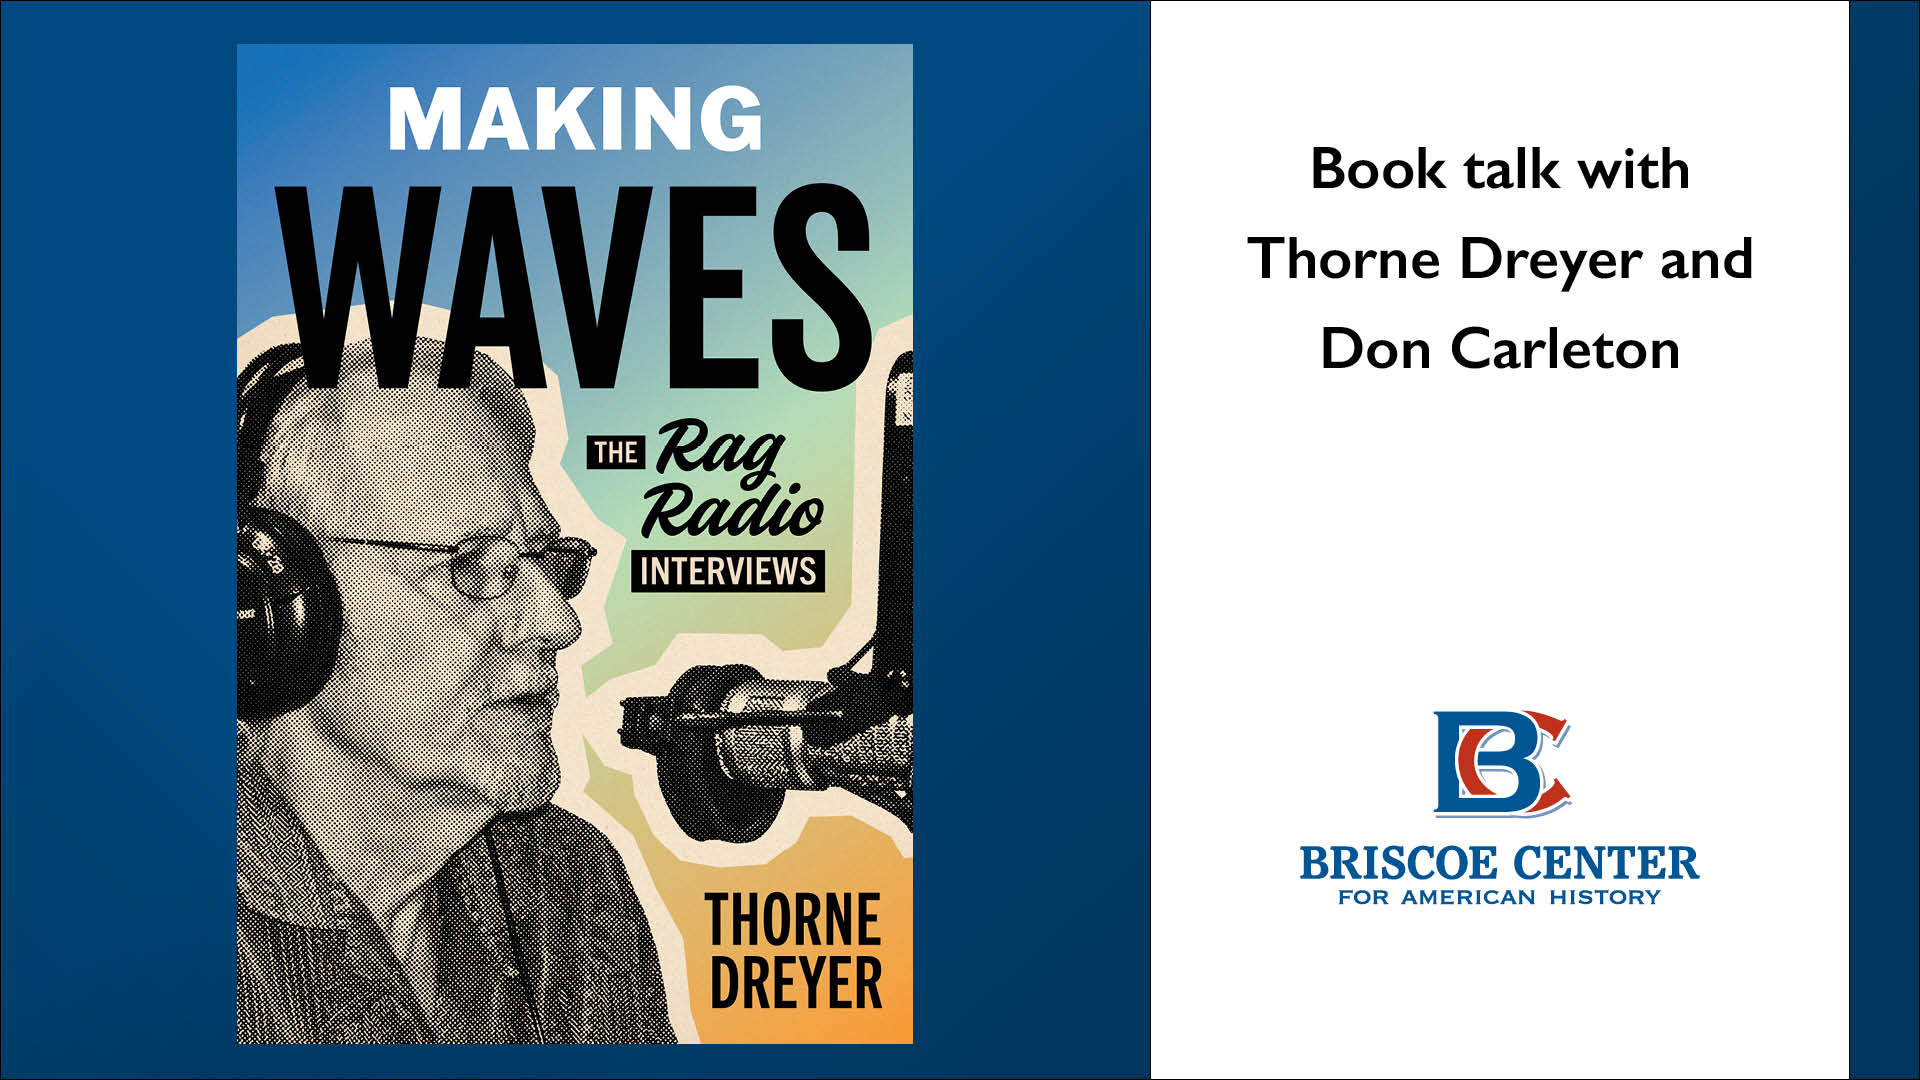 Book talk with Thorne Dreyer and Don Carleton